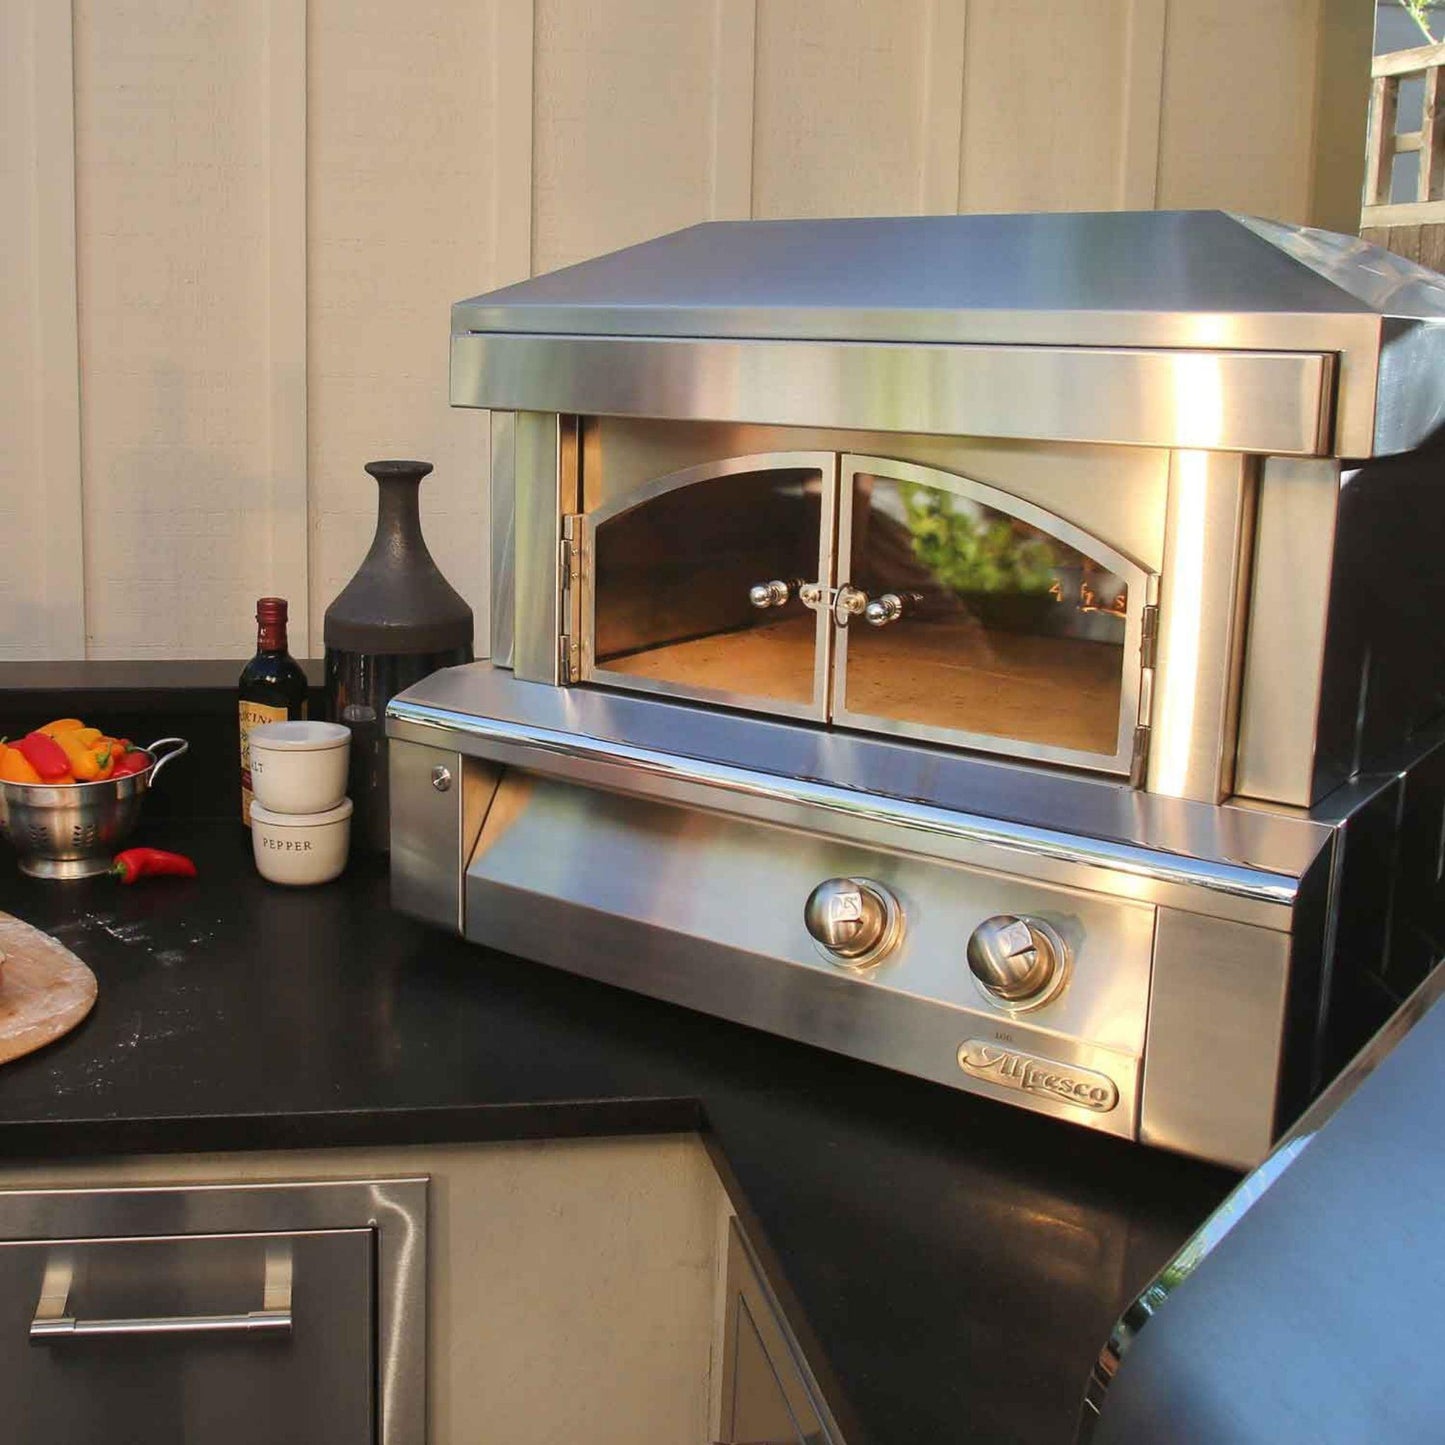 Alfresco 30" Signal White Matte Natural Gas Pizza Oven for Countertop Mounting